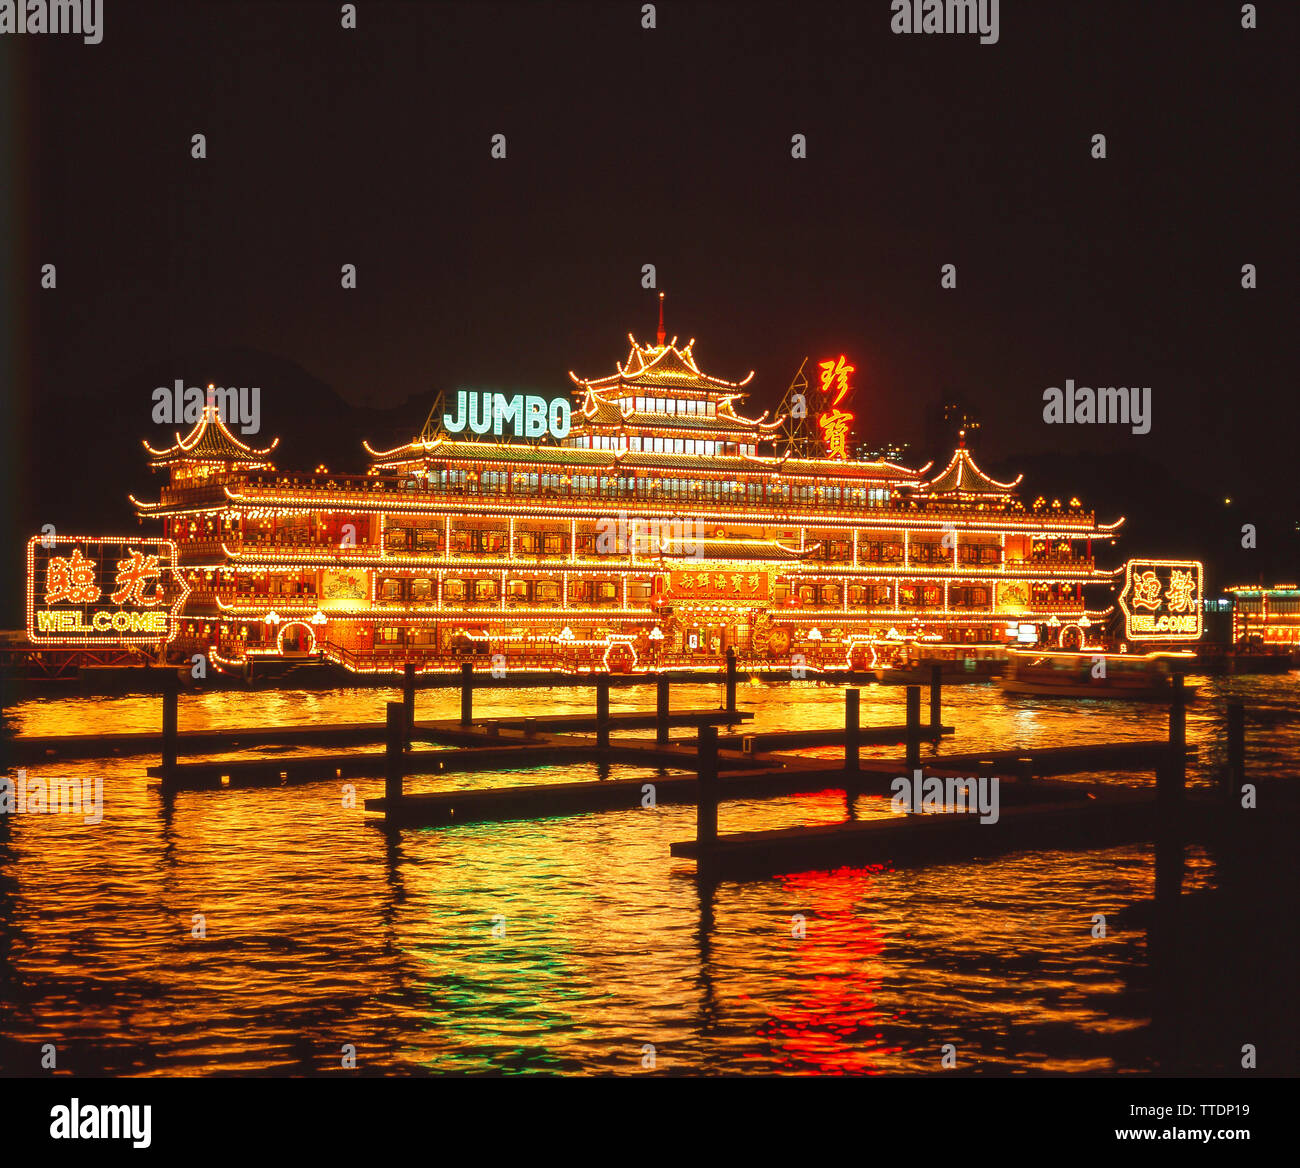 'Jumbo' floating Chinese restaurant at night, Aberdeen Harbour, Hong Kong, People's Republic of China Stock Photo